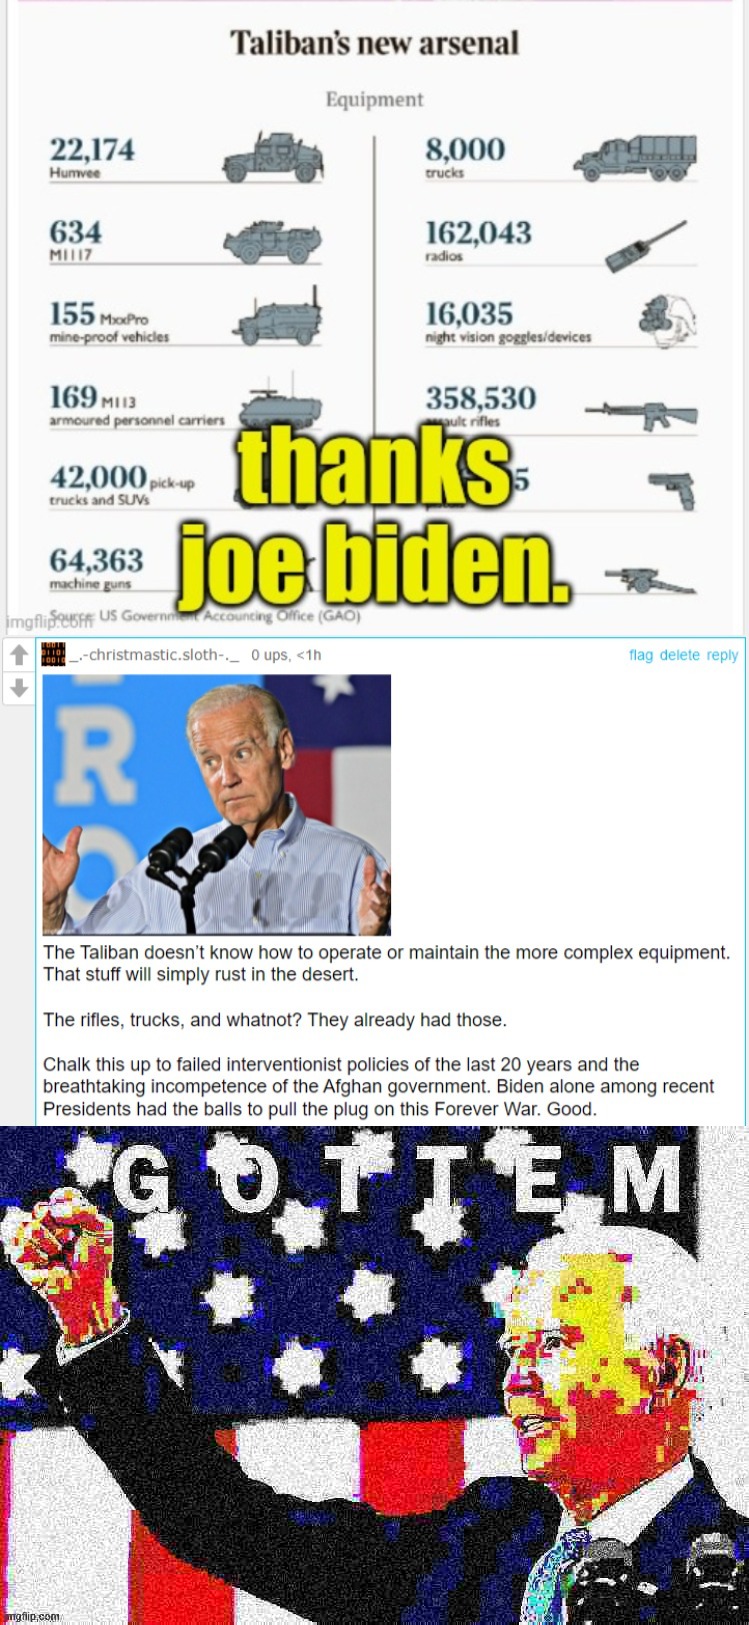 The Taliban captured radios, night vision goggles, rifles, trucks, and some shit they can't use. Oh noes! | image tagged in taliban's new arsenal debunked,joe biden gottem 2 sharpened jpeg min quality deep-fried | made w/ Imgflip meme maker